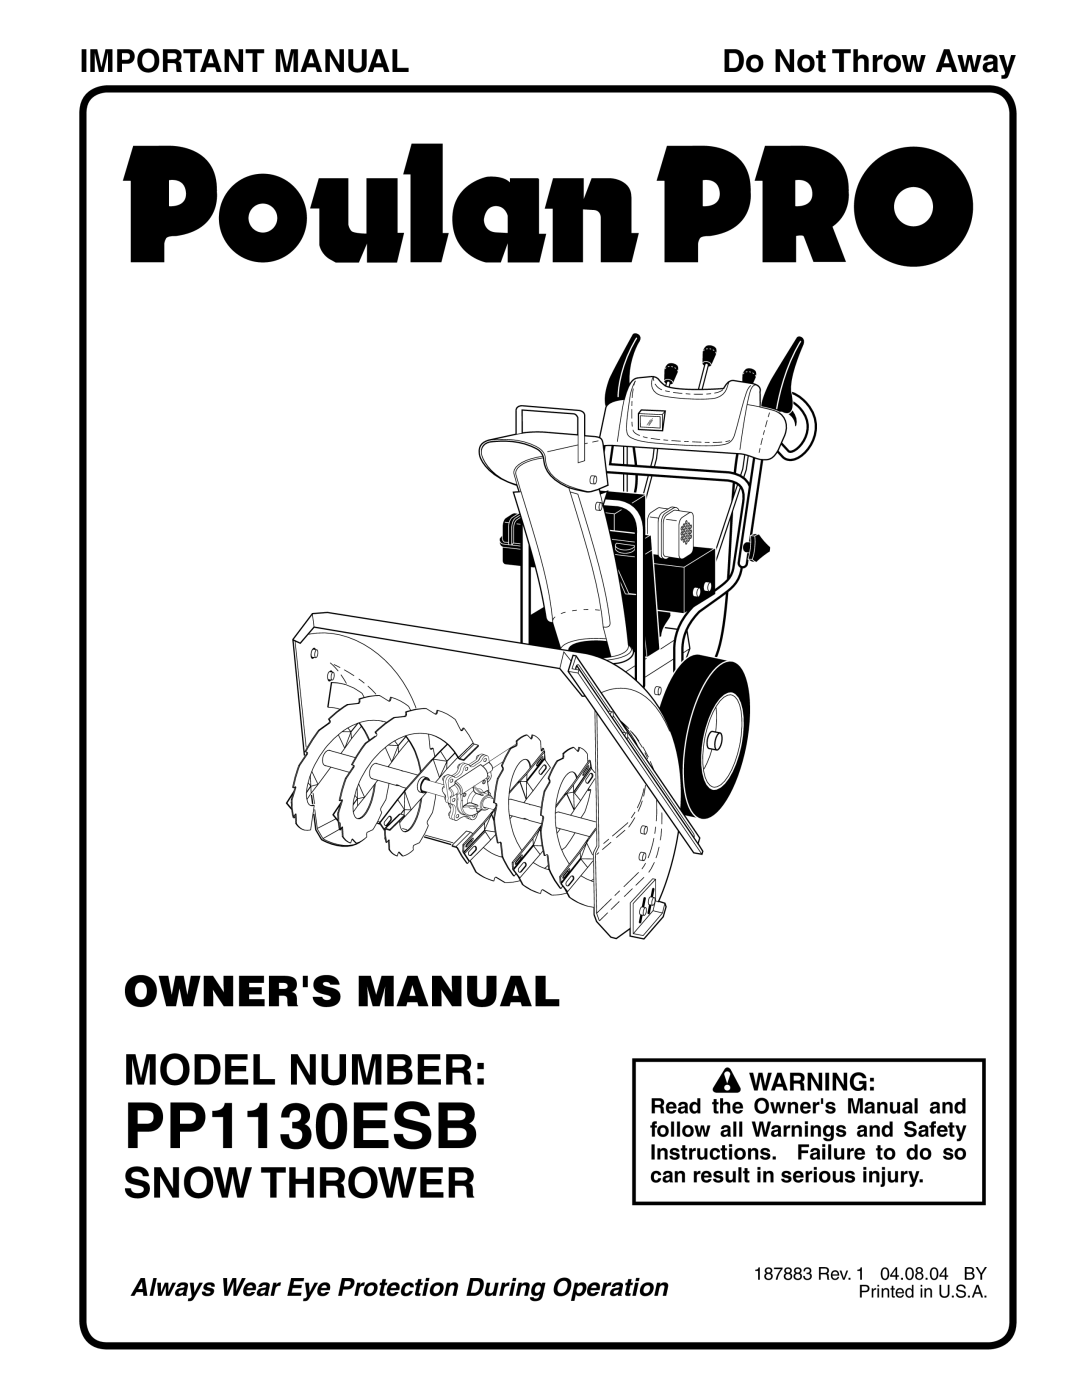 Poulan 187883 owner manual Owners Manual Model Number, Snow Thrower, Important Manual, PP1130ESB, Do Not Throw Away 